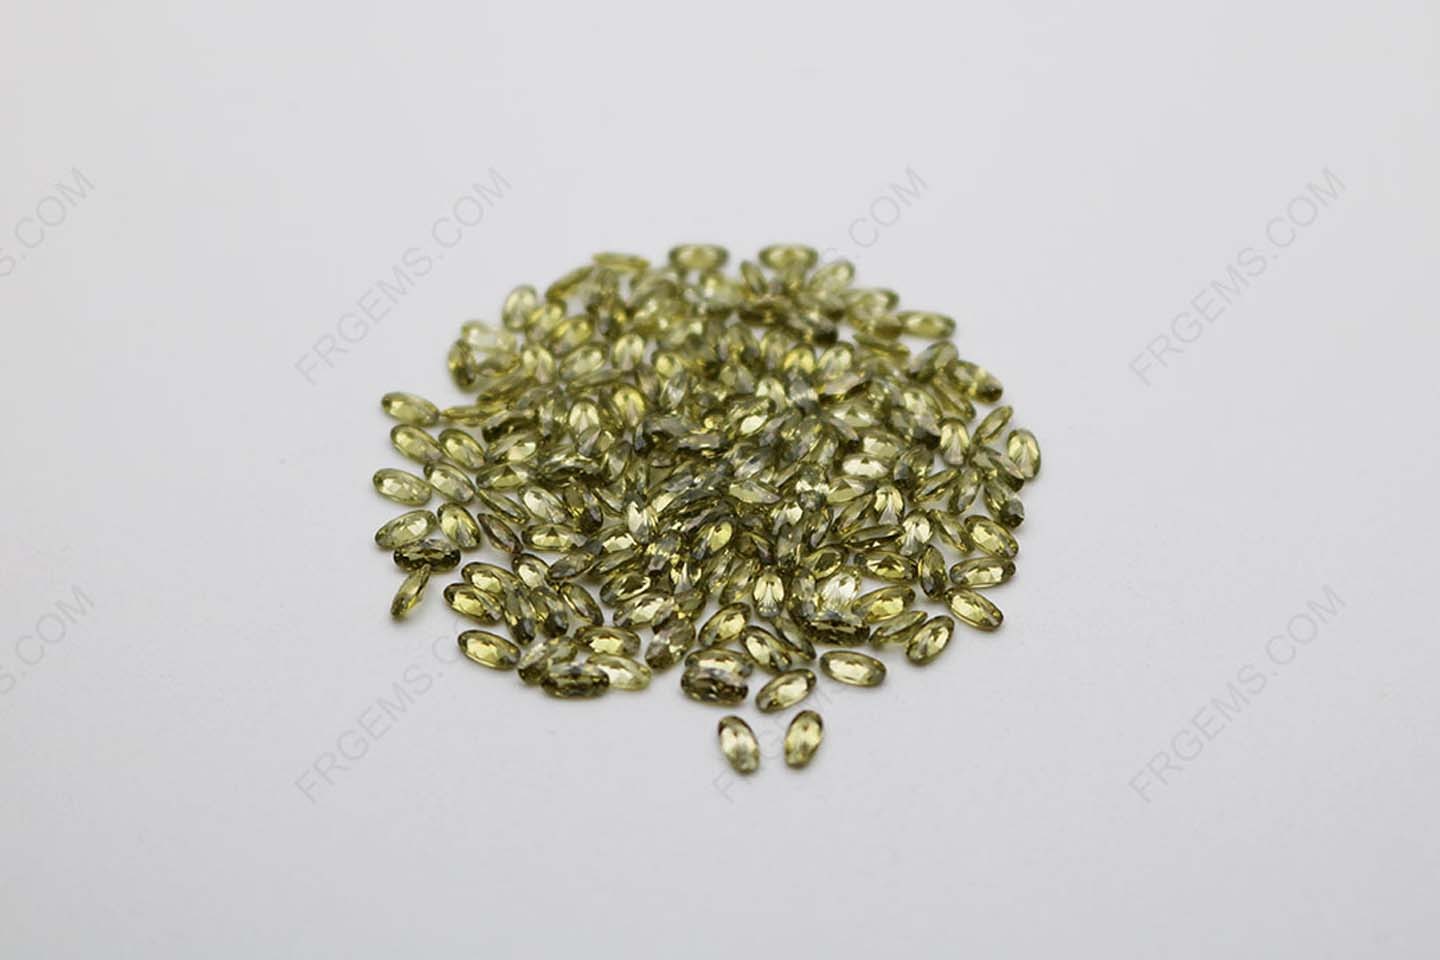 Cubic Zirconia Peridot Oval Shape faceted cut 4x2mm stones CZ27 IMG_1043